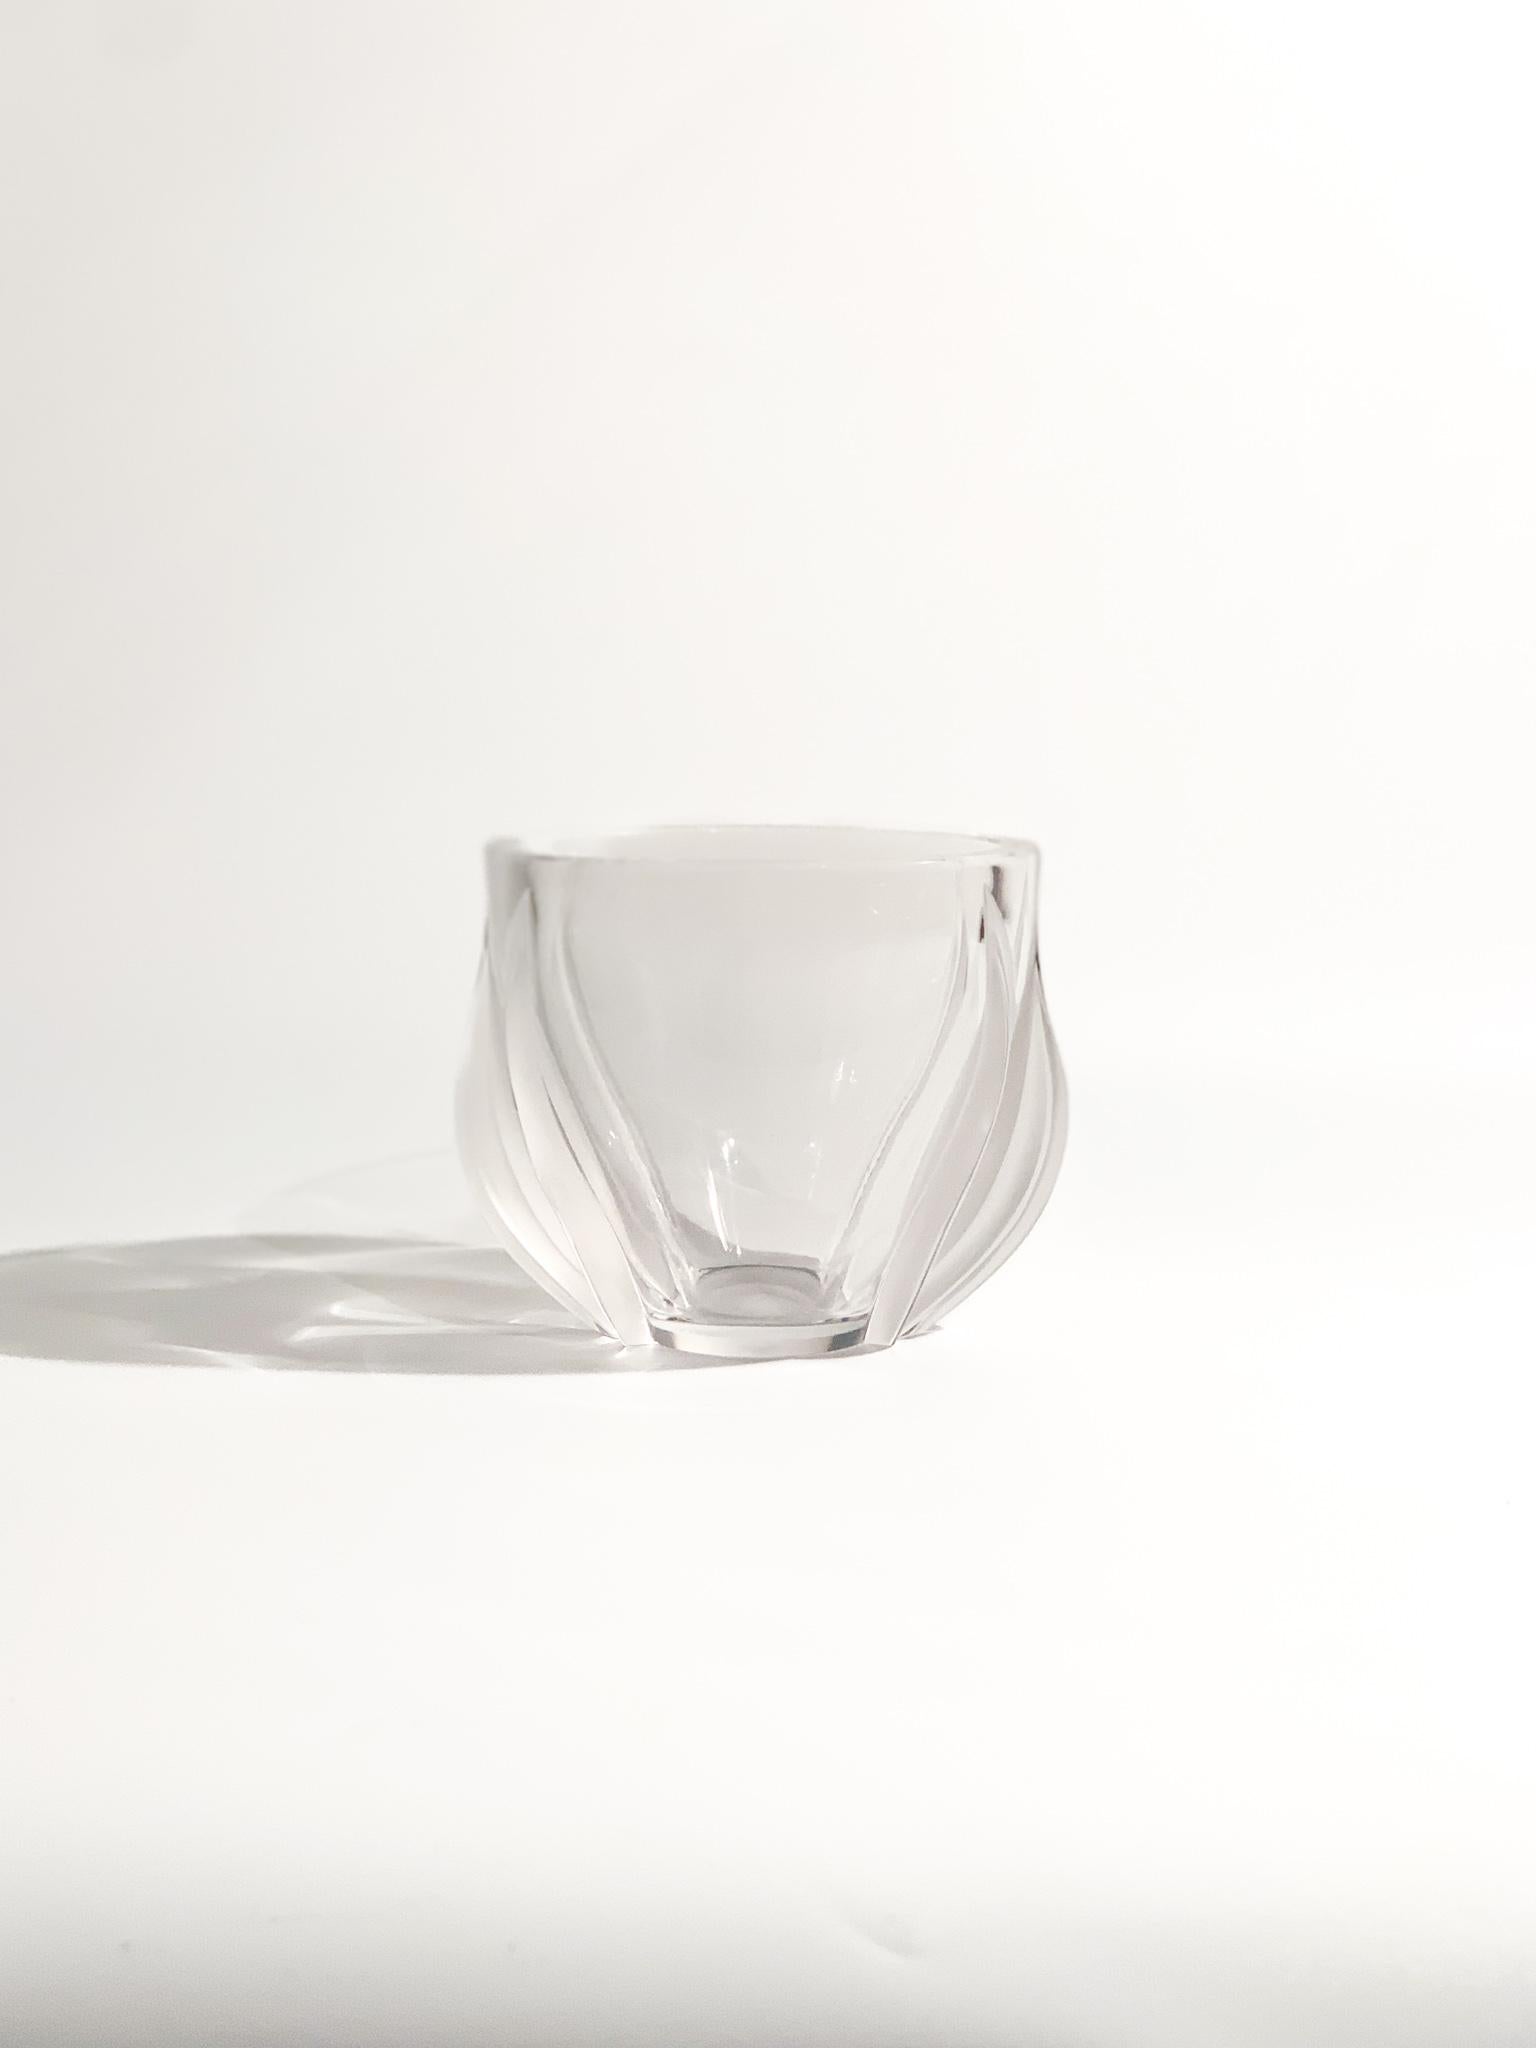 Lalique crystal vase, Deux Tulipes model, made in the 1980s

Ø cm 13 h cm 10

I Lalique crystals  born from the idea of René Lalique, a French jeweler and glassmaker. 

During his career he collaborated with various important brands, such as Cartier